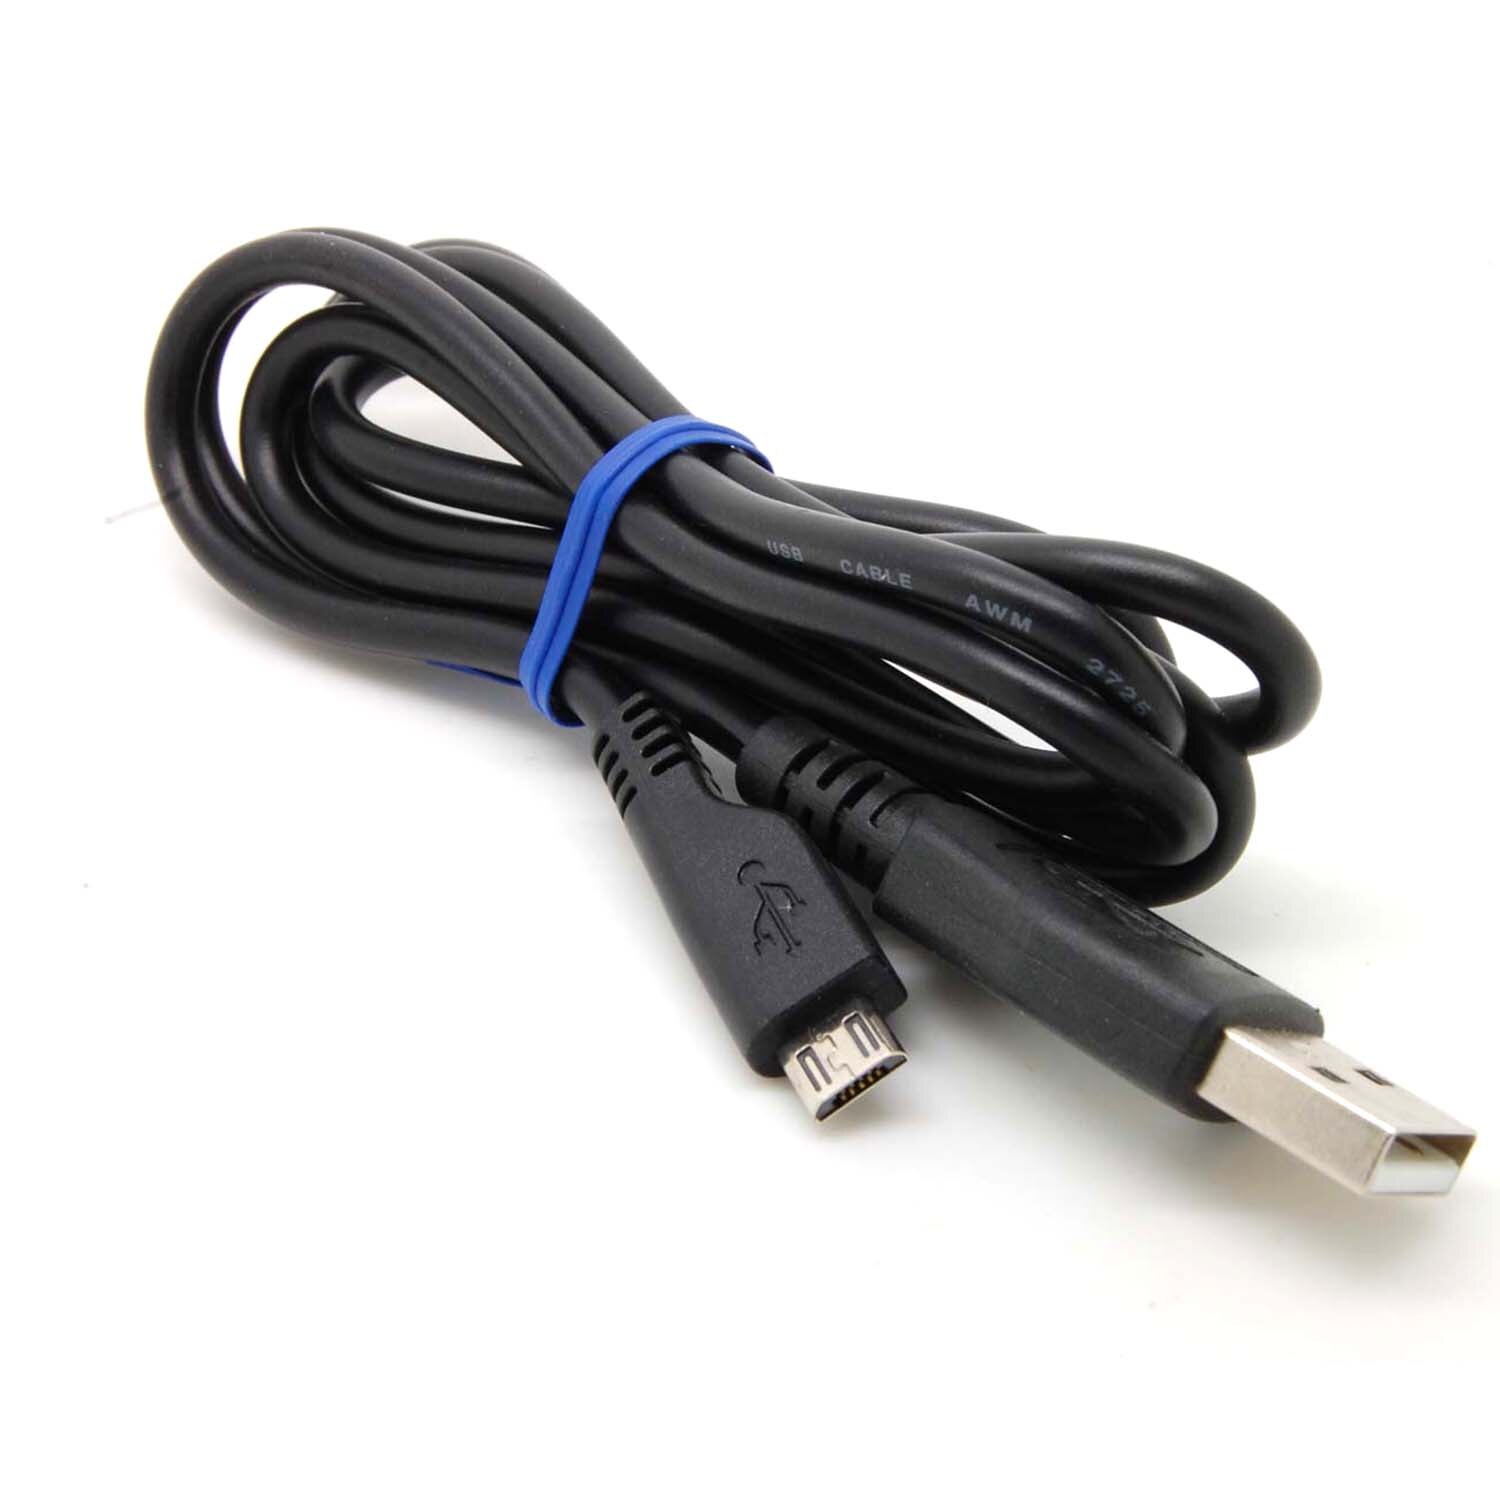 Usb Data Charger Cable Voor Samsung Sm G3608 G3139D I8250 Galaxy Y Trend Duos S Sl S3 Mini